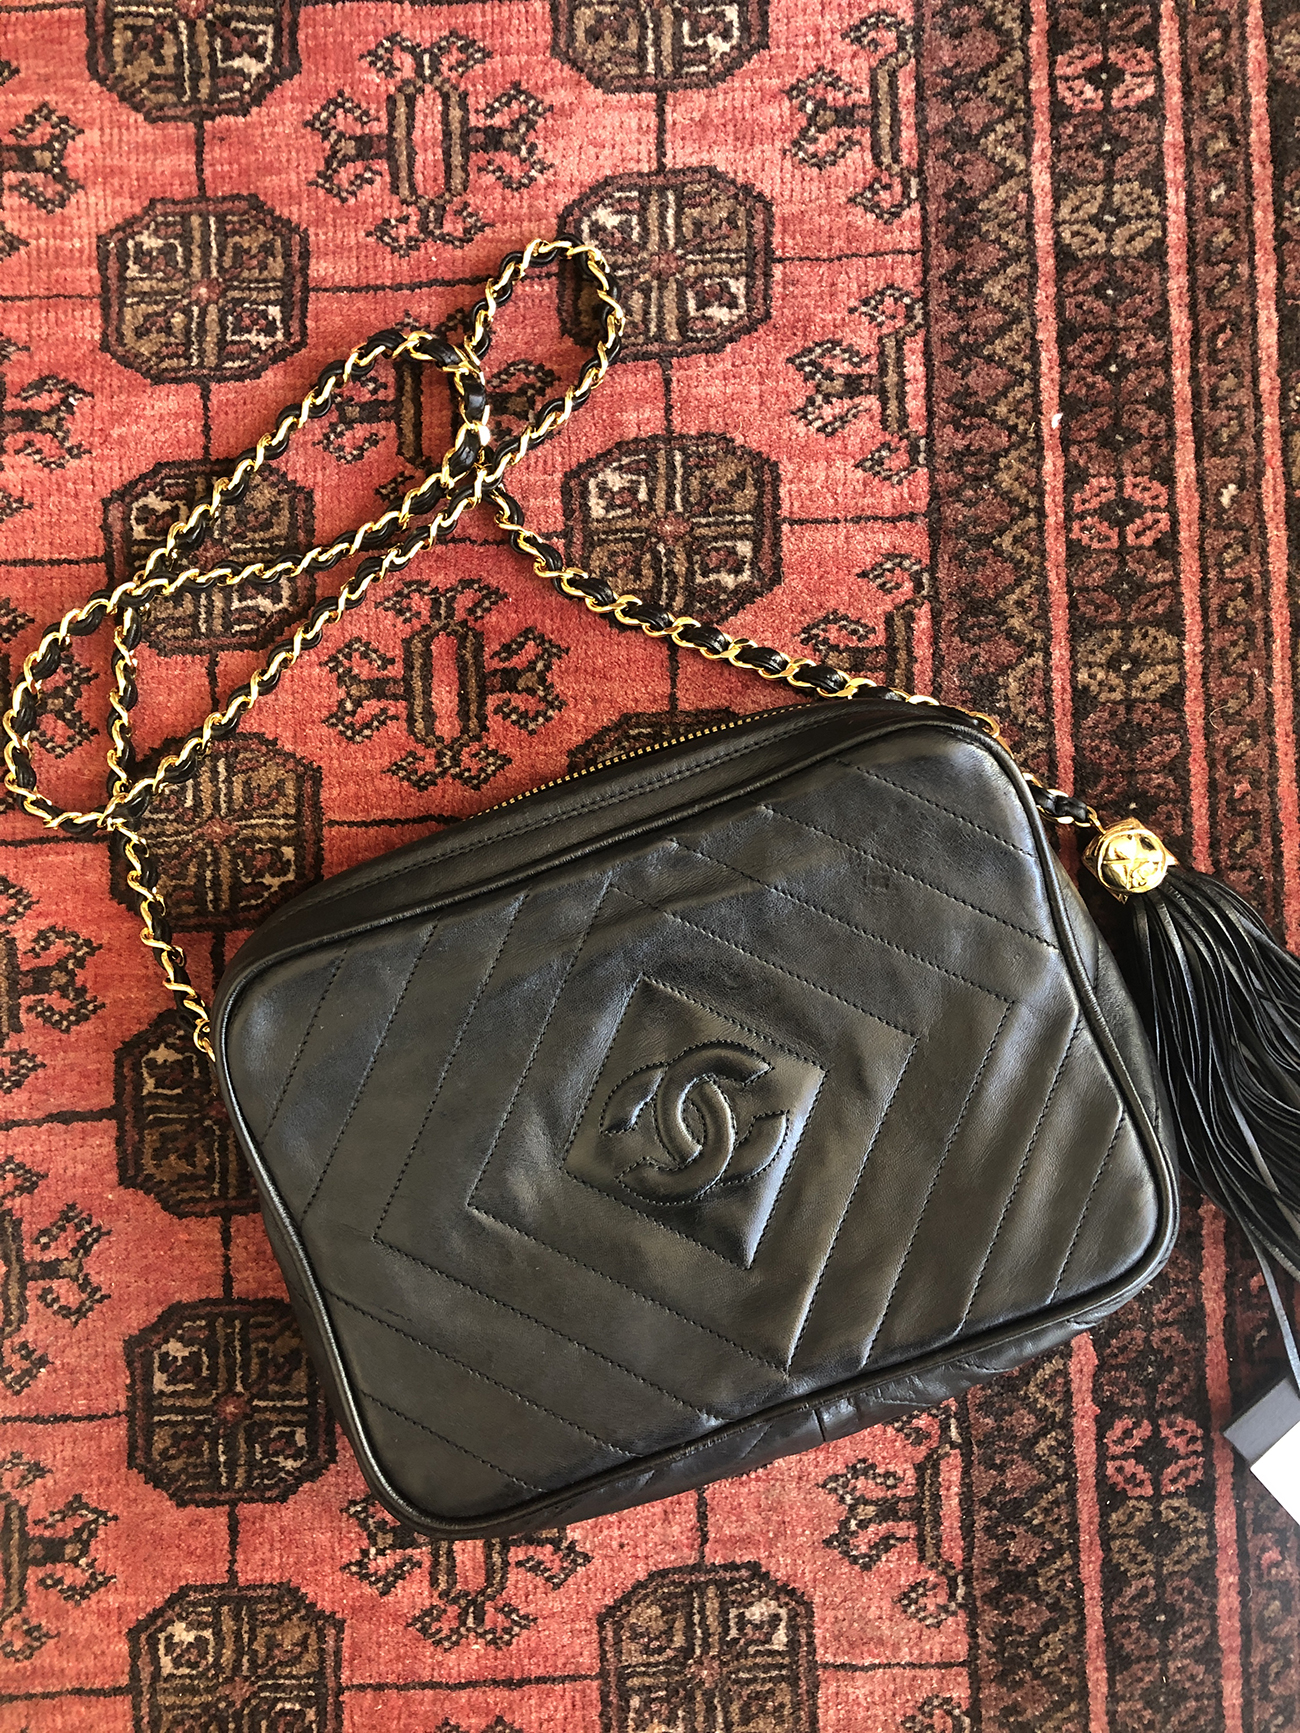 Authentic Vintage Chanel Bag Genuine Leather 